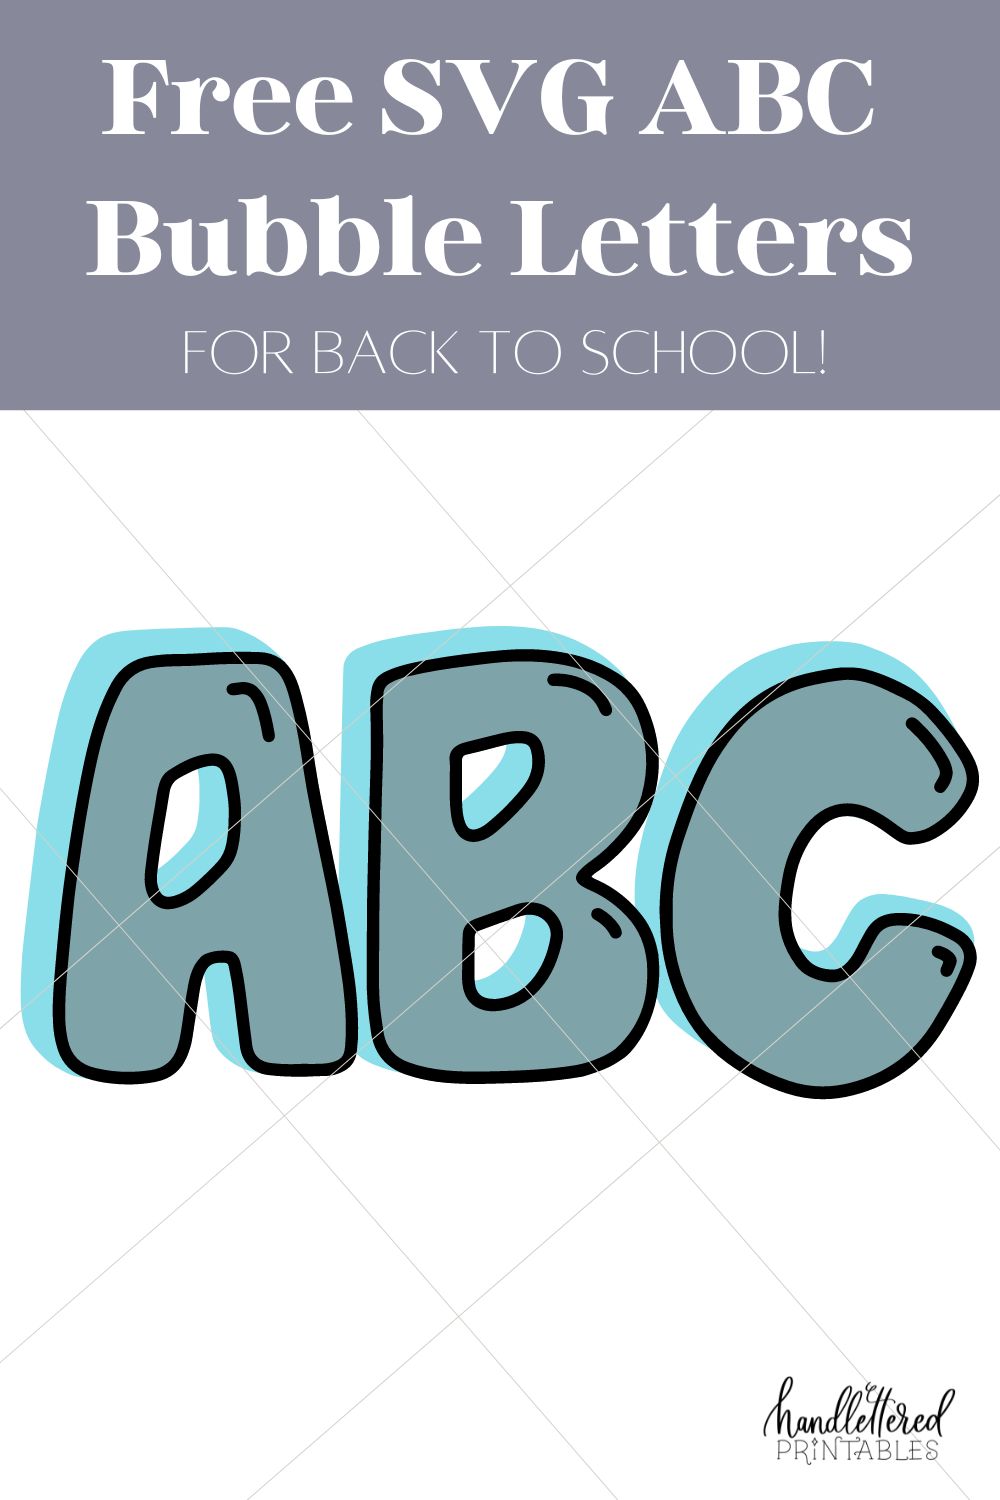 Free bubble letters ABC SVG files mockup with title